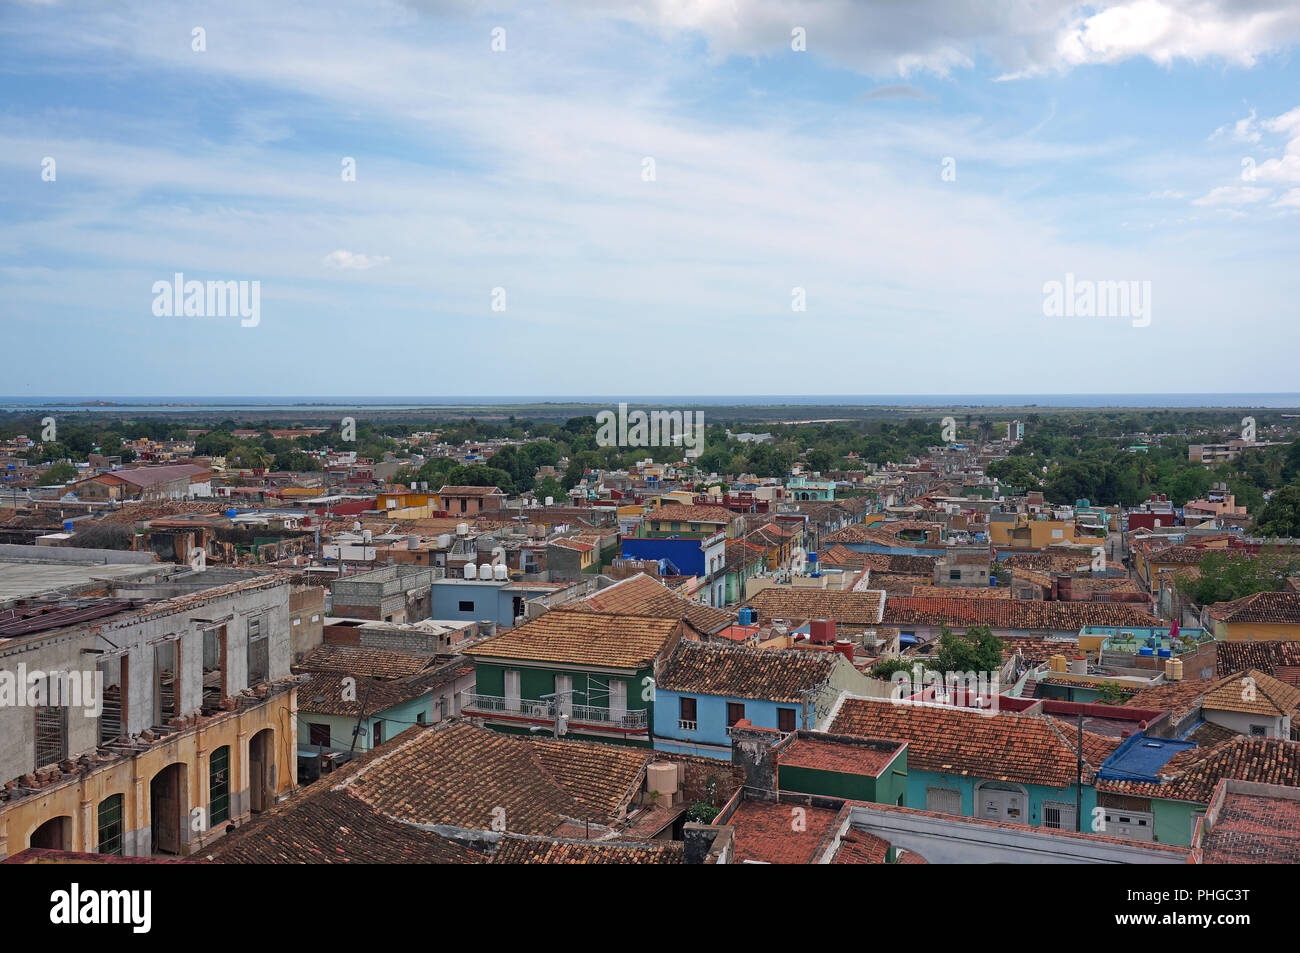 Typical colorful buildings in Trinidad on Cuba Stock Photo